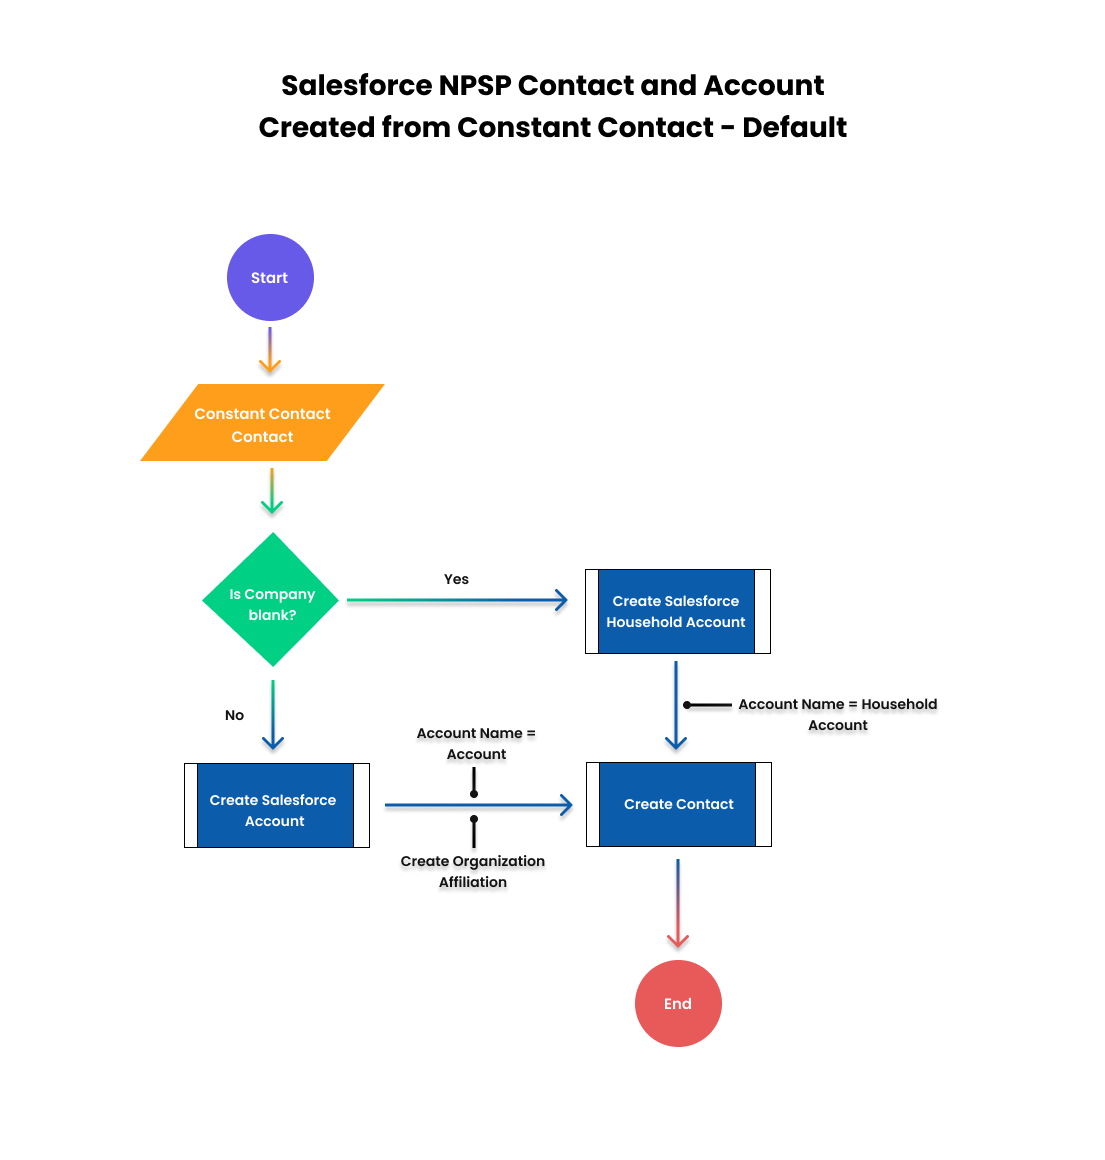 Salesforce_NPSP_Contact__and_Account_Created_from__Constant_Contact_-_Default__1_.png